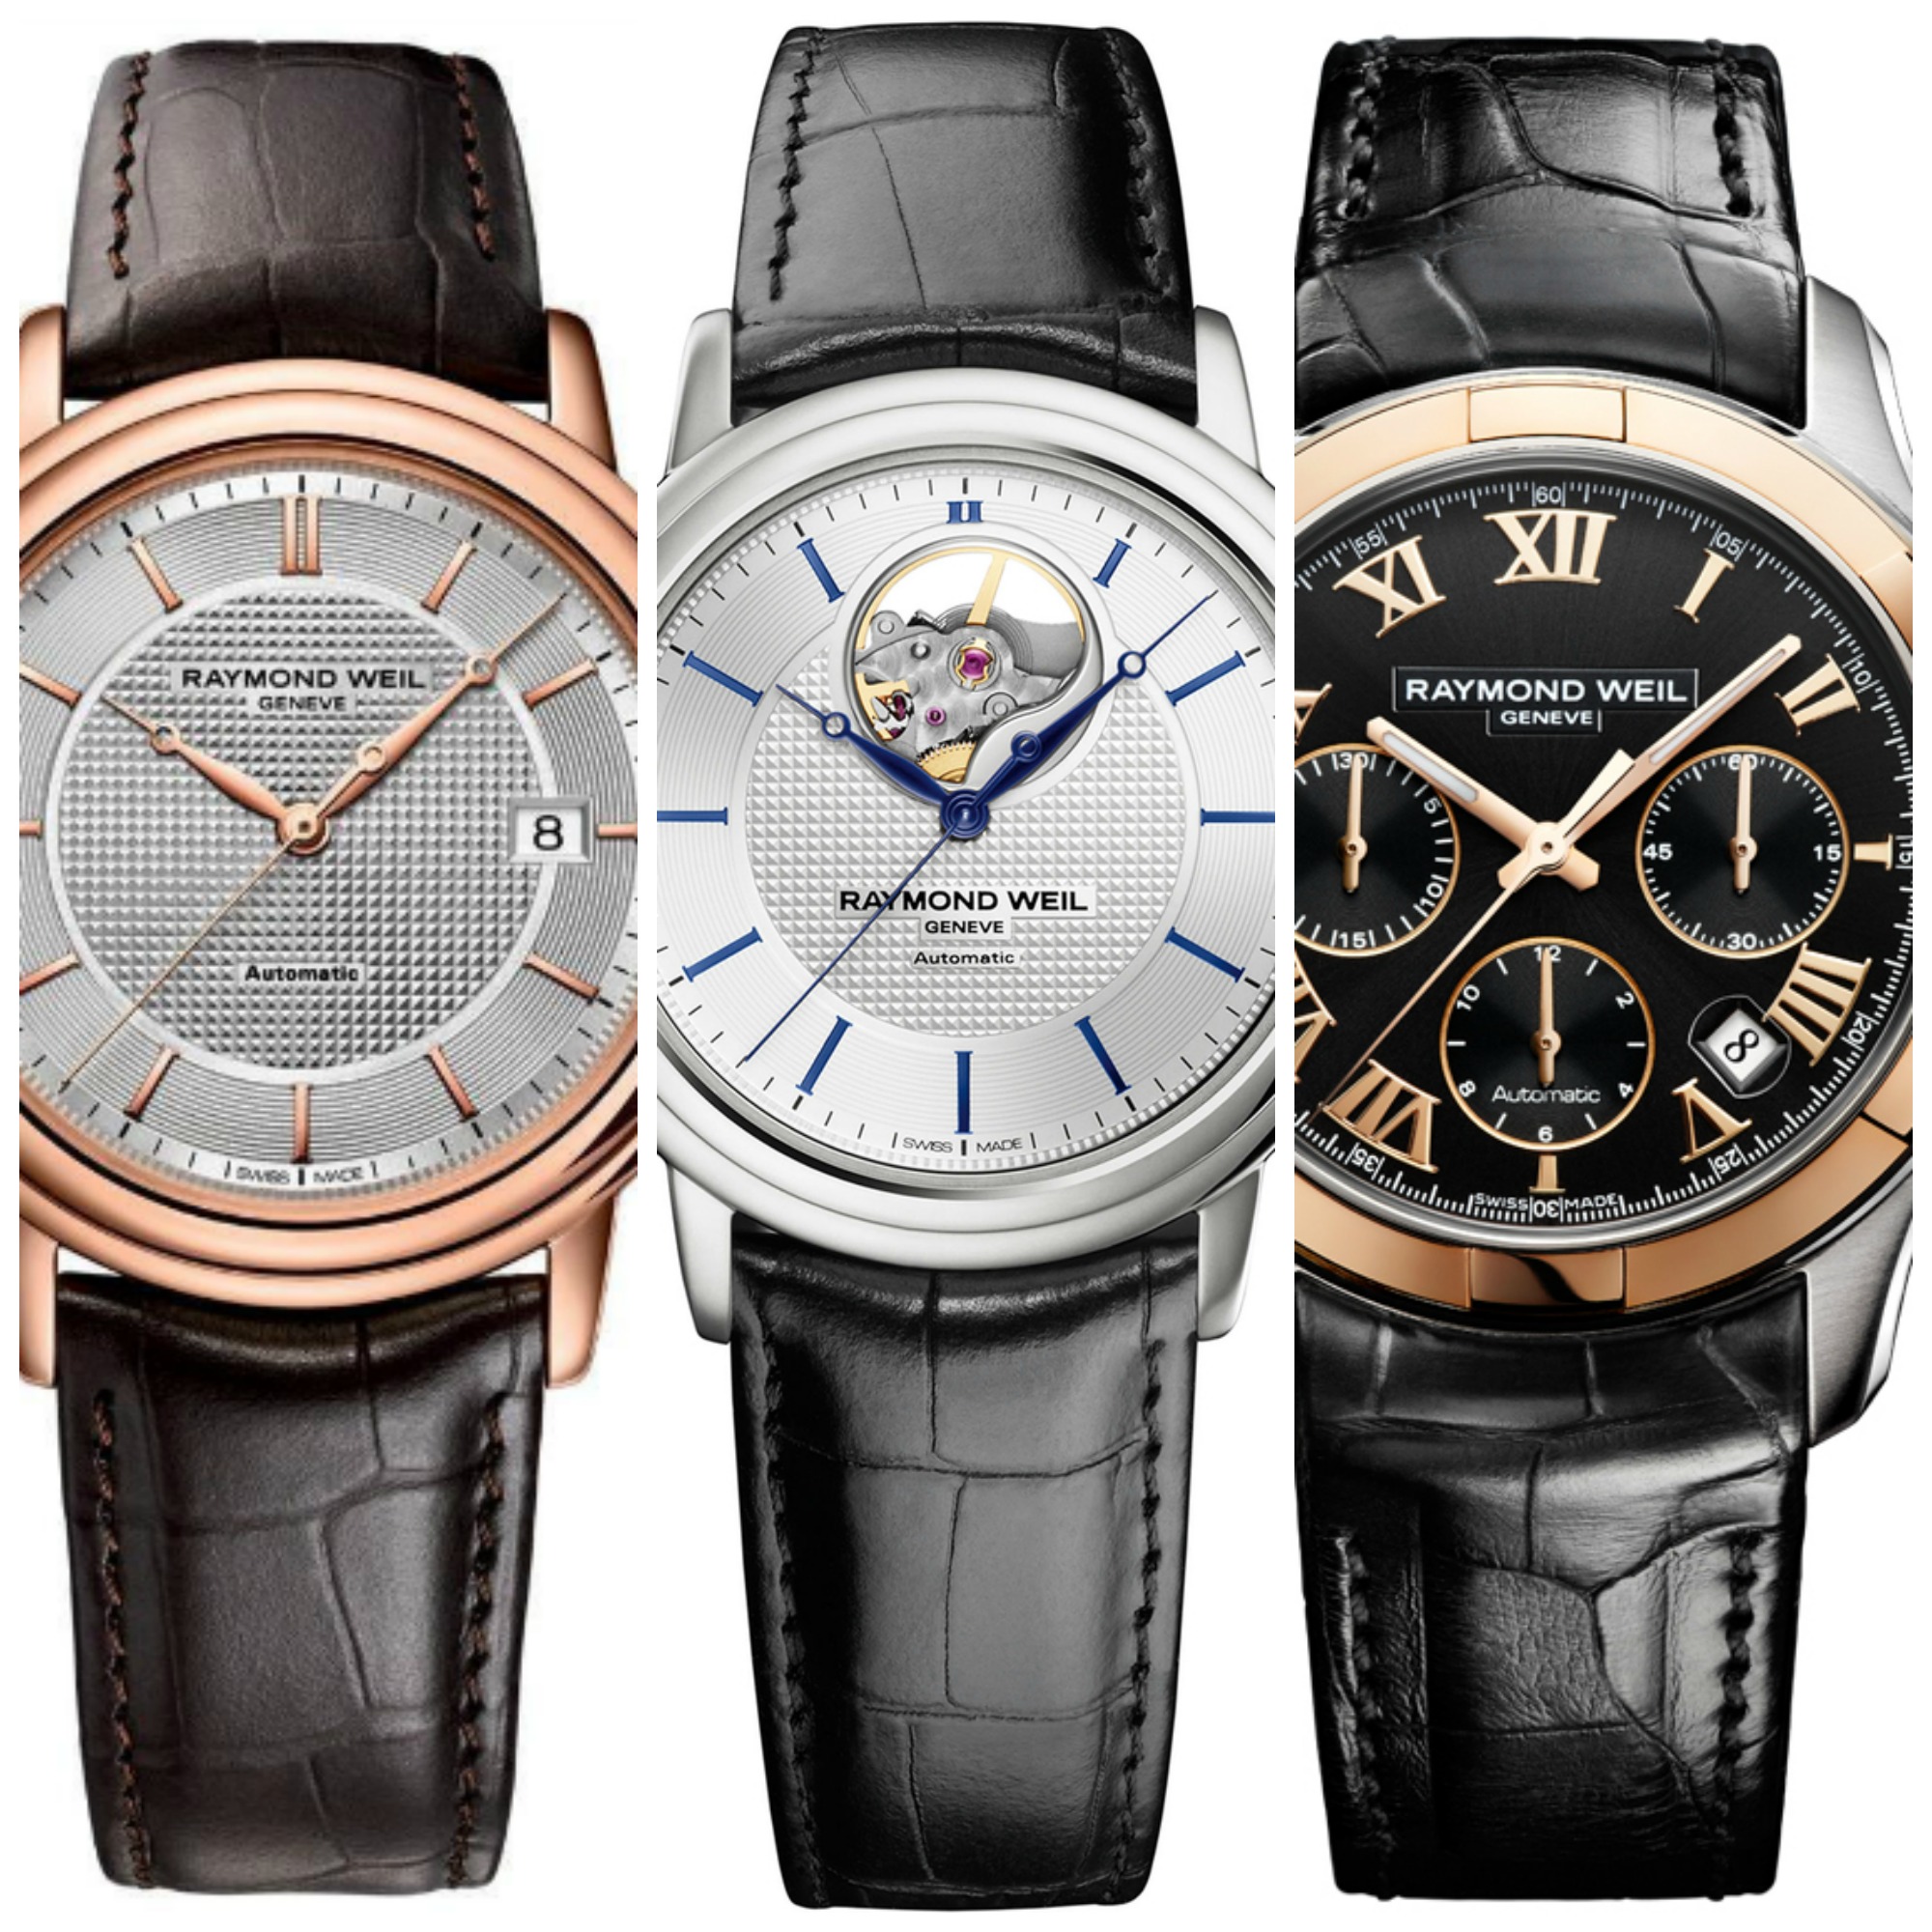 Raymond Weil Watches Review - Are They Any Good? - The Watch Blog